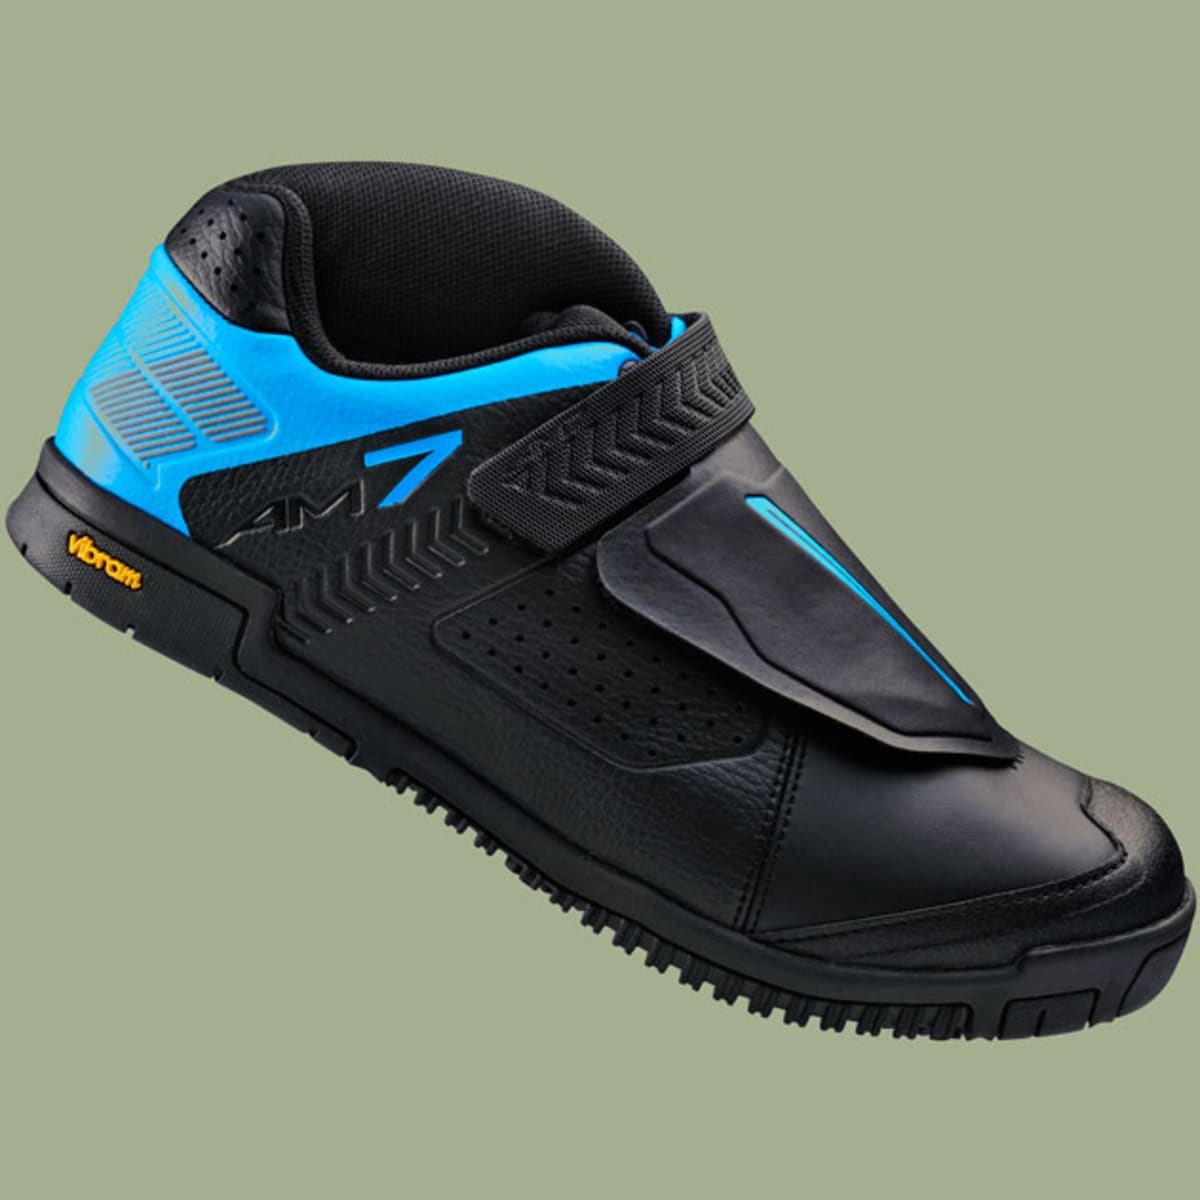 CX242 Regular - Lake Road Cycling Shoes - UK Delivery